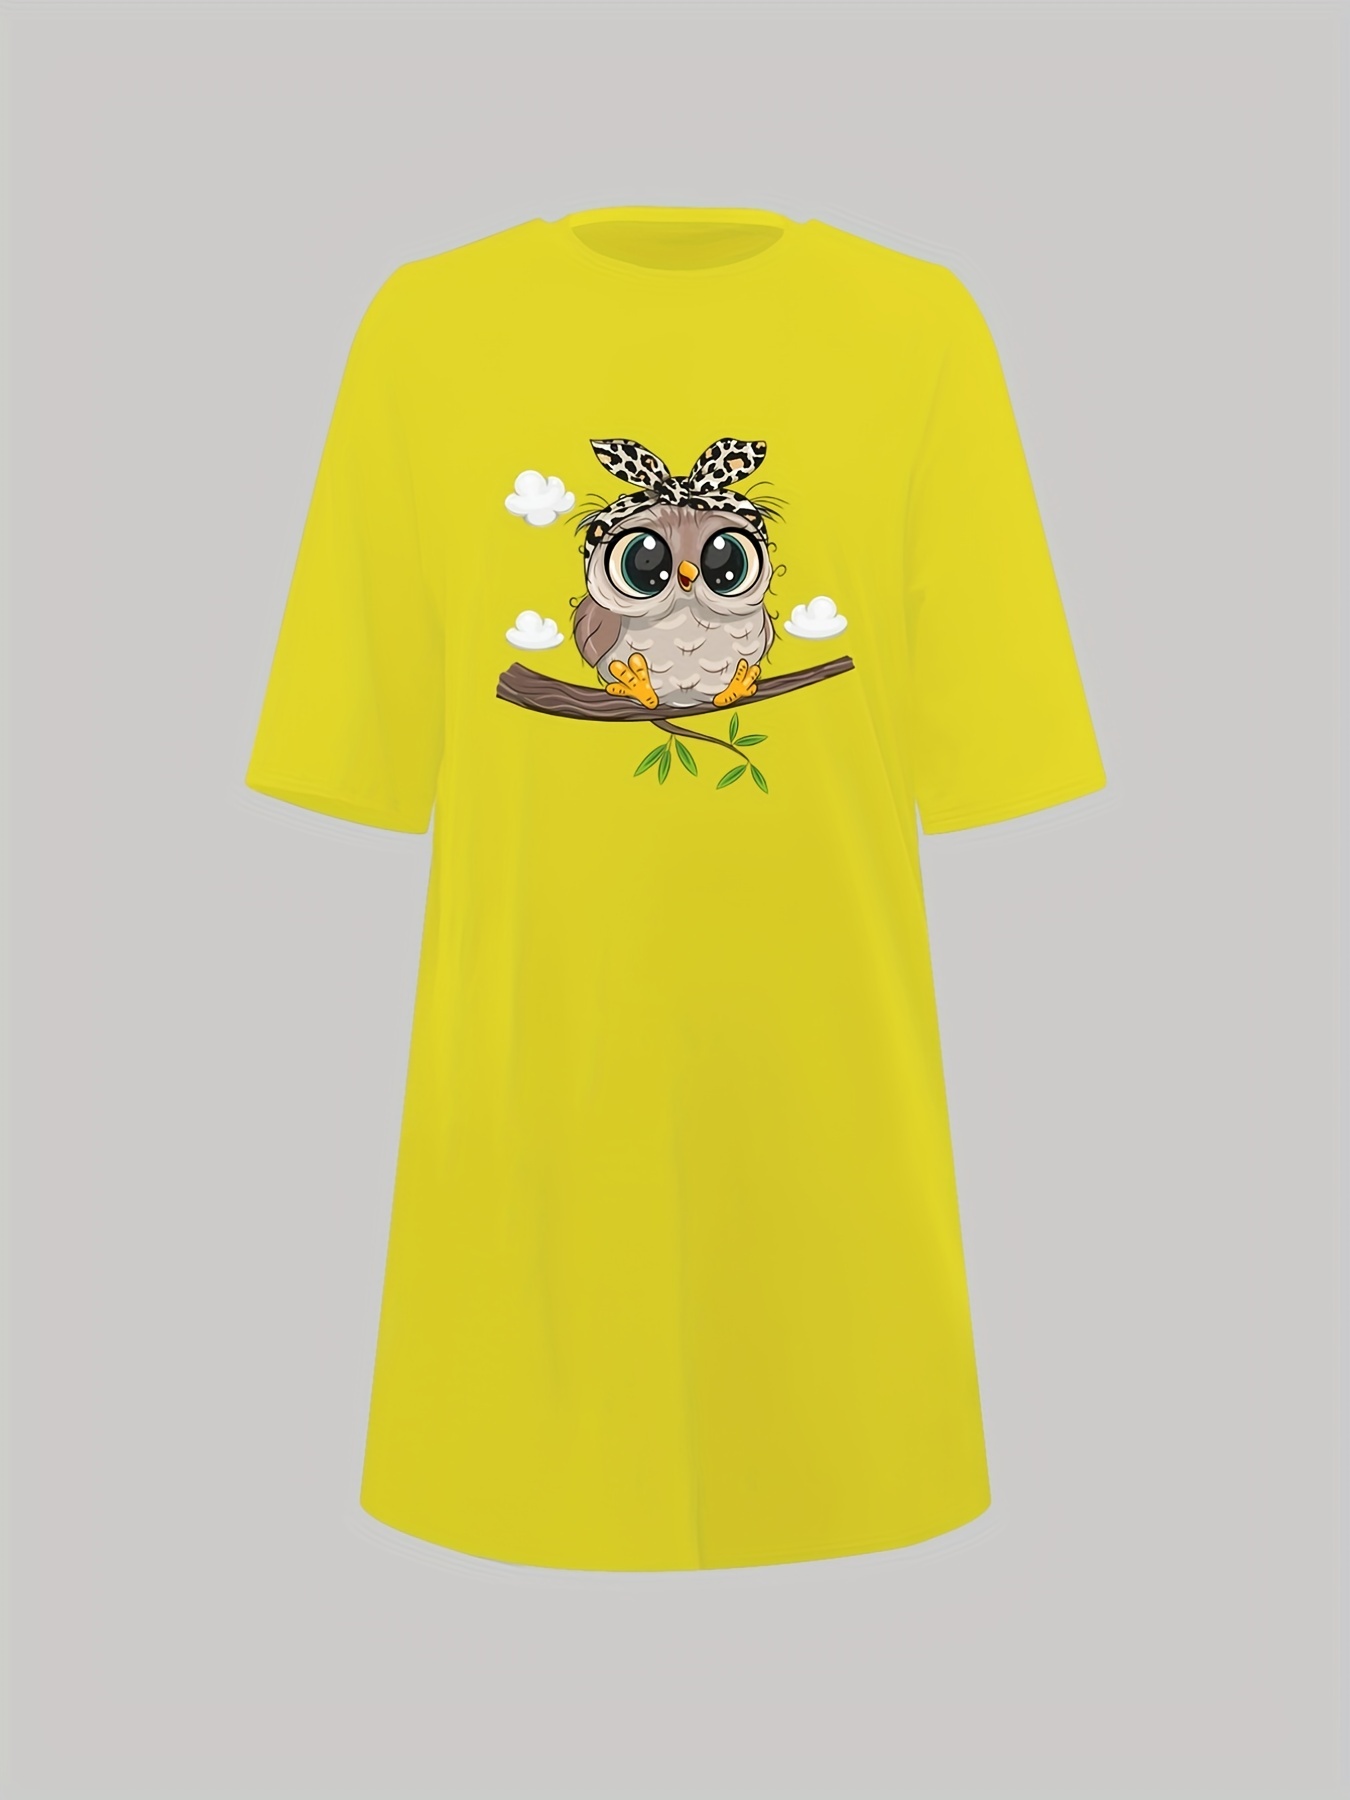 Emelivor Colorful Cartoon Owls Nightgowns for Women Chemise Sleepwear Soft  Pajama Dress for Women Girls Adult,S at  Women's Clothing store